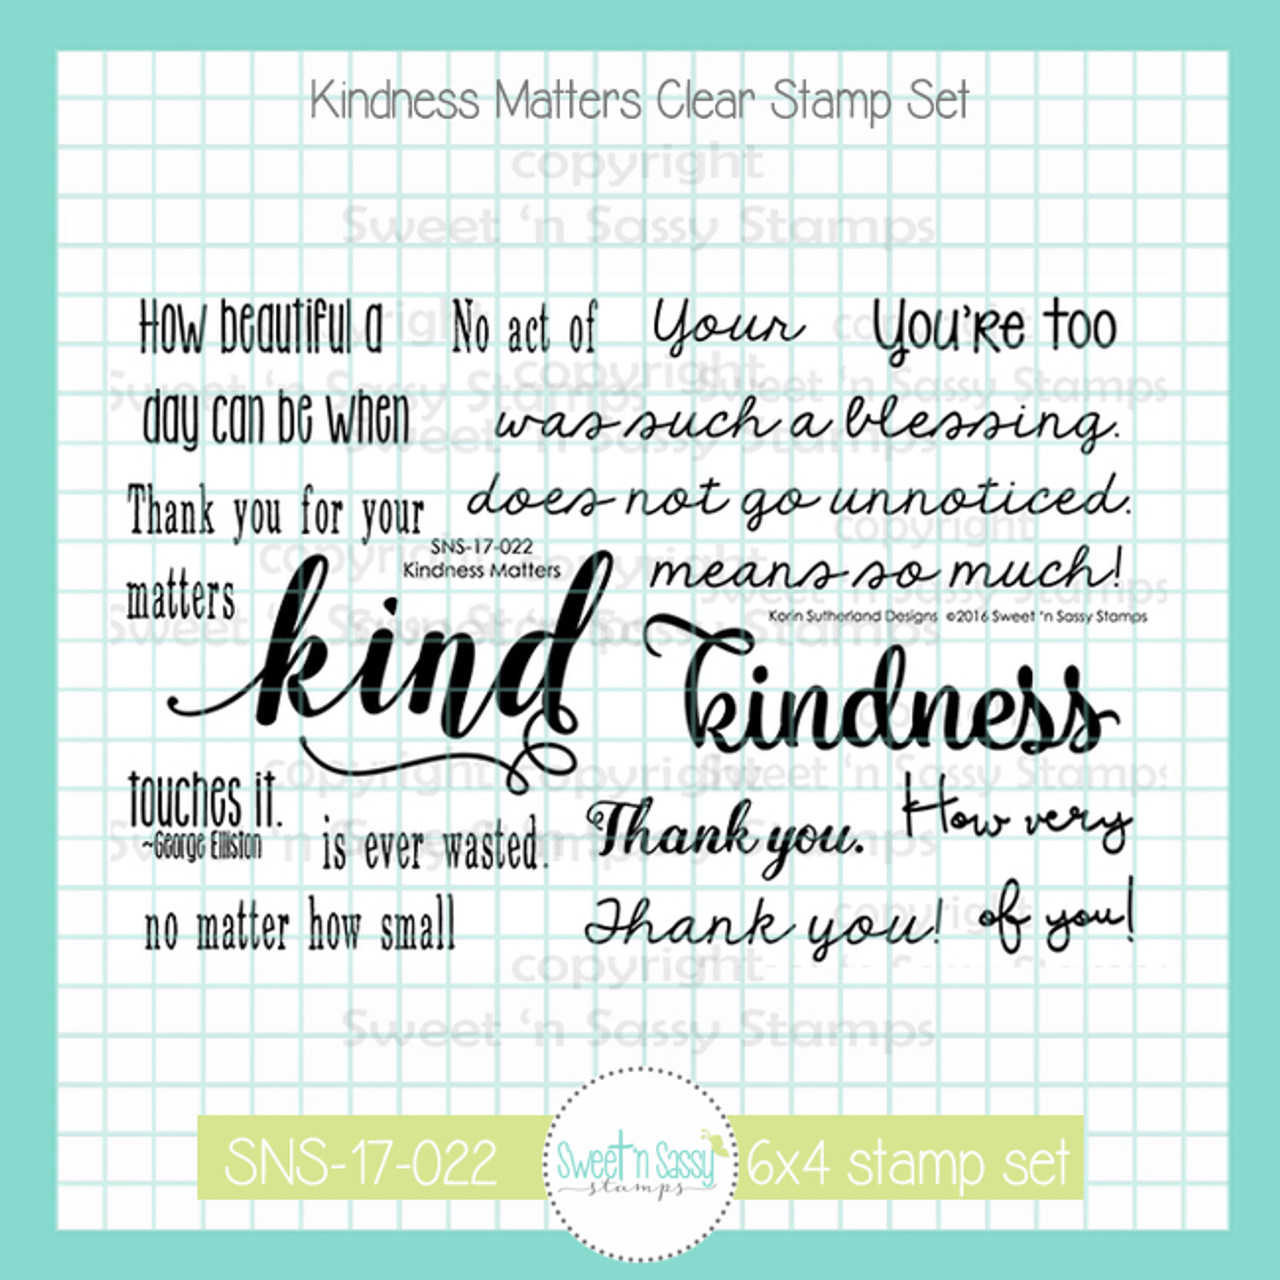 Kindness Matters Clear Stamp Set - Sweet 'n Sassy Stamps